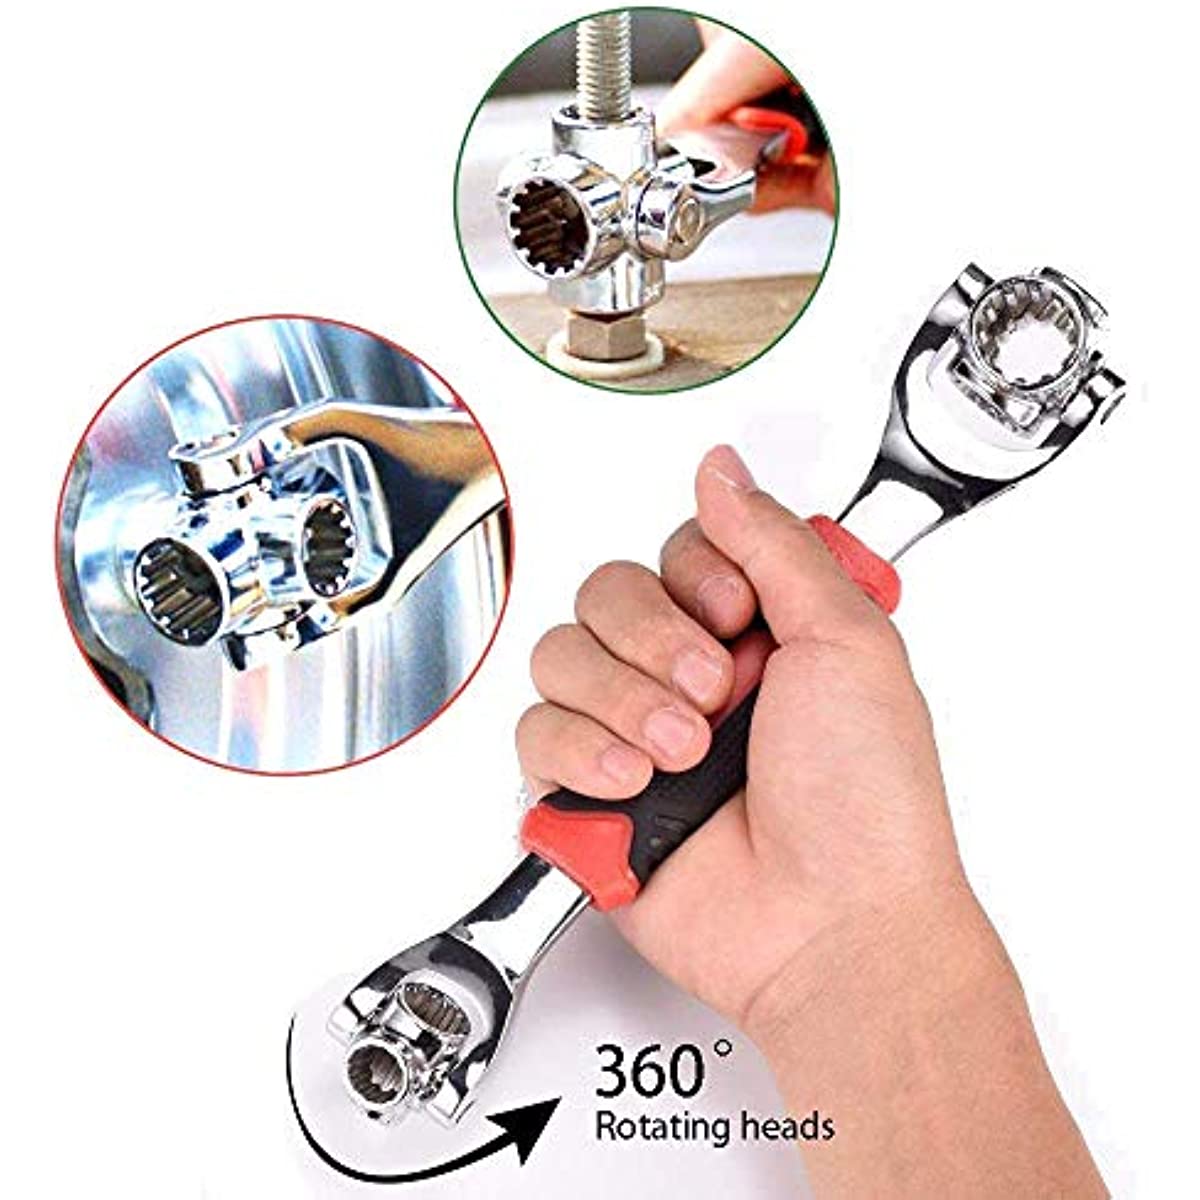 CLE UNIVERSELLE 360° - 48 OUTILS - DOUILLE